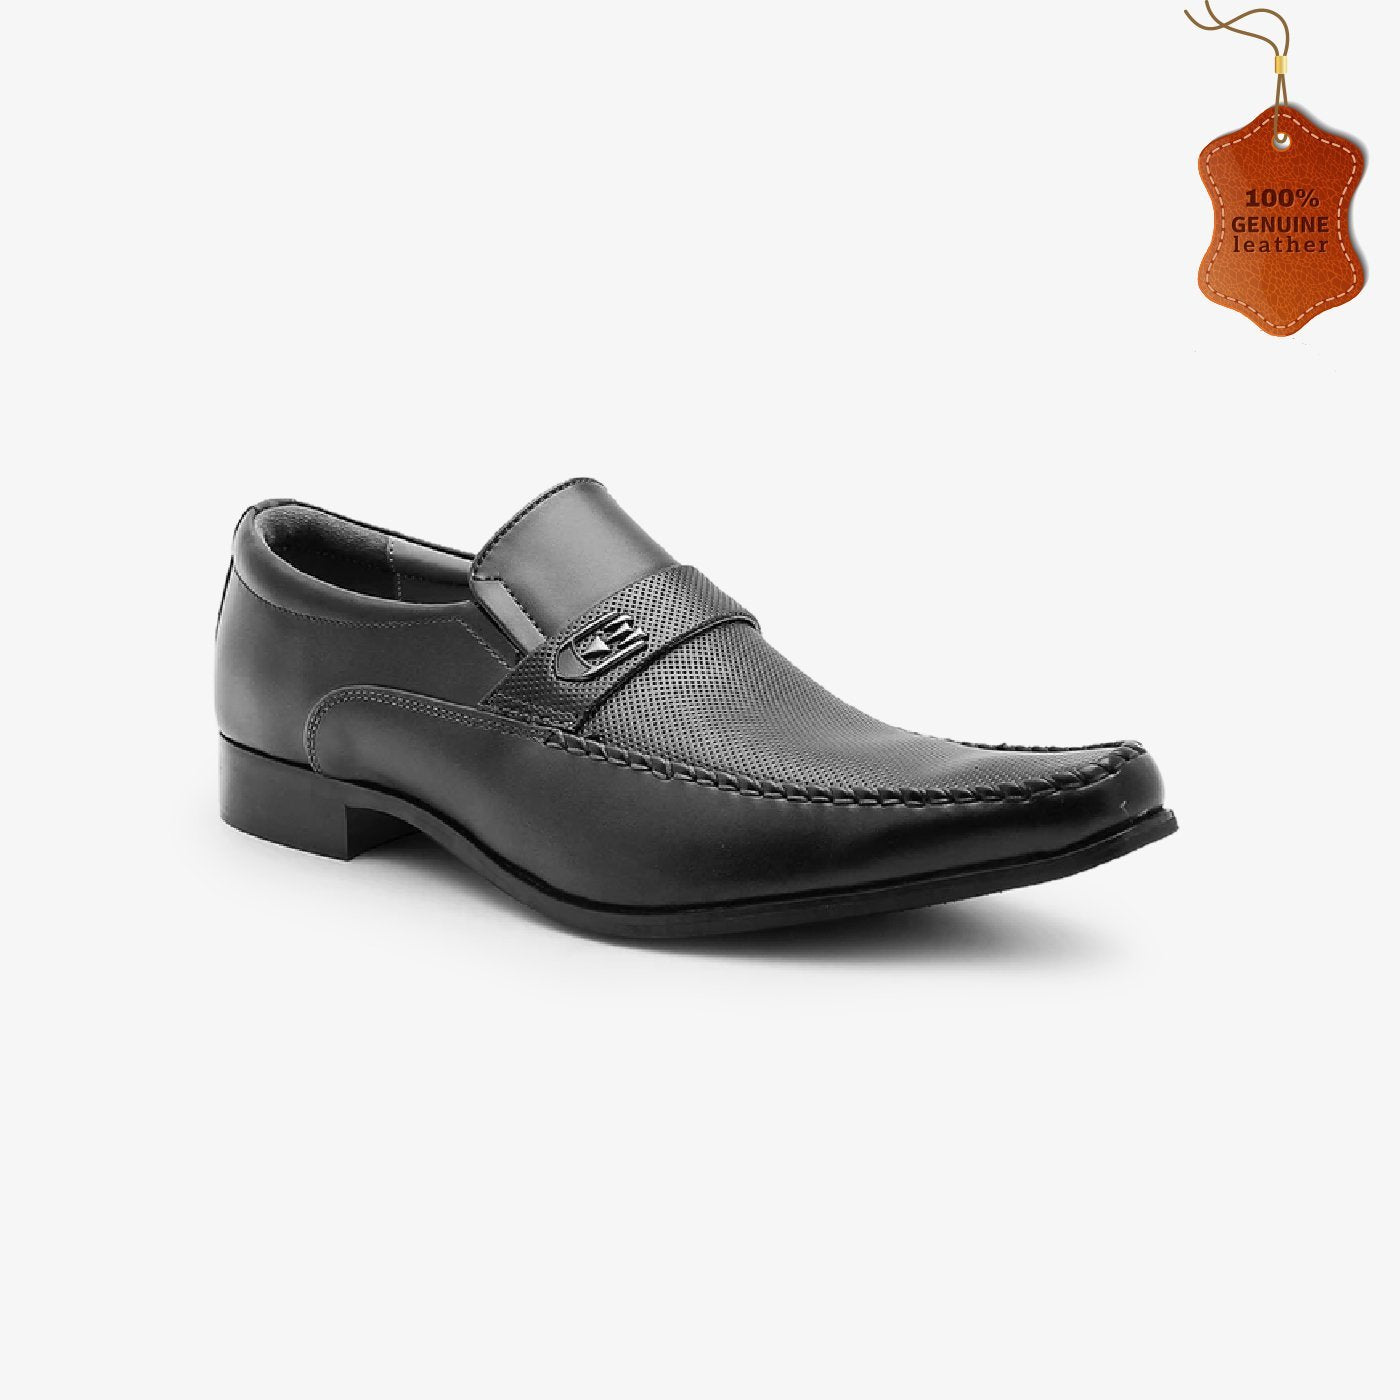 Ndure Formal Shoes Outlet, SAVE 59% 